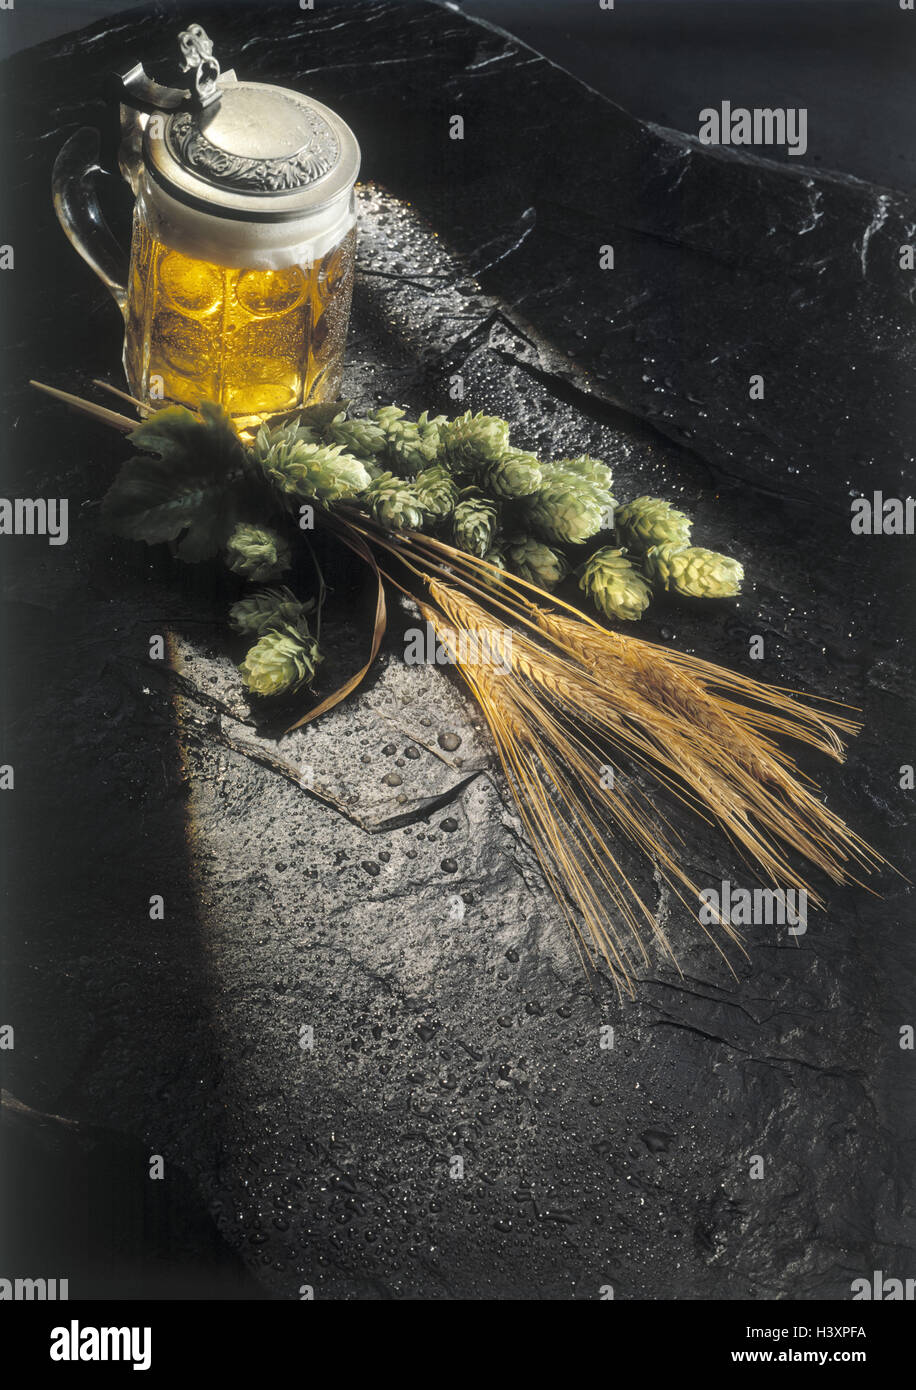 , Still life, beer mug, stuffed, hops, barley, ears, icon, brewing art, ingredients, purity requirement glass, jug, beer glass, tin lid, beer, alcohol, grain, brewing, ground ingredients, in Bavarian, law, cleanness, Stock Photo